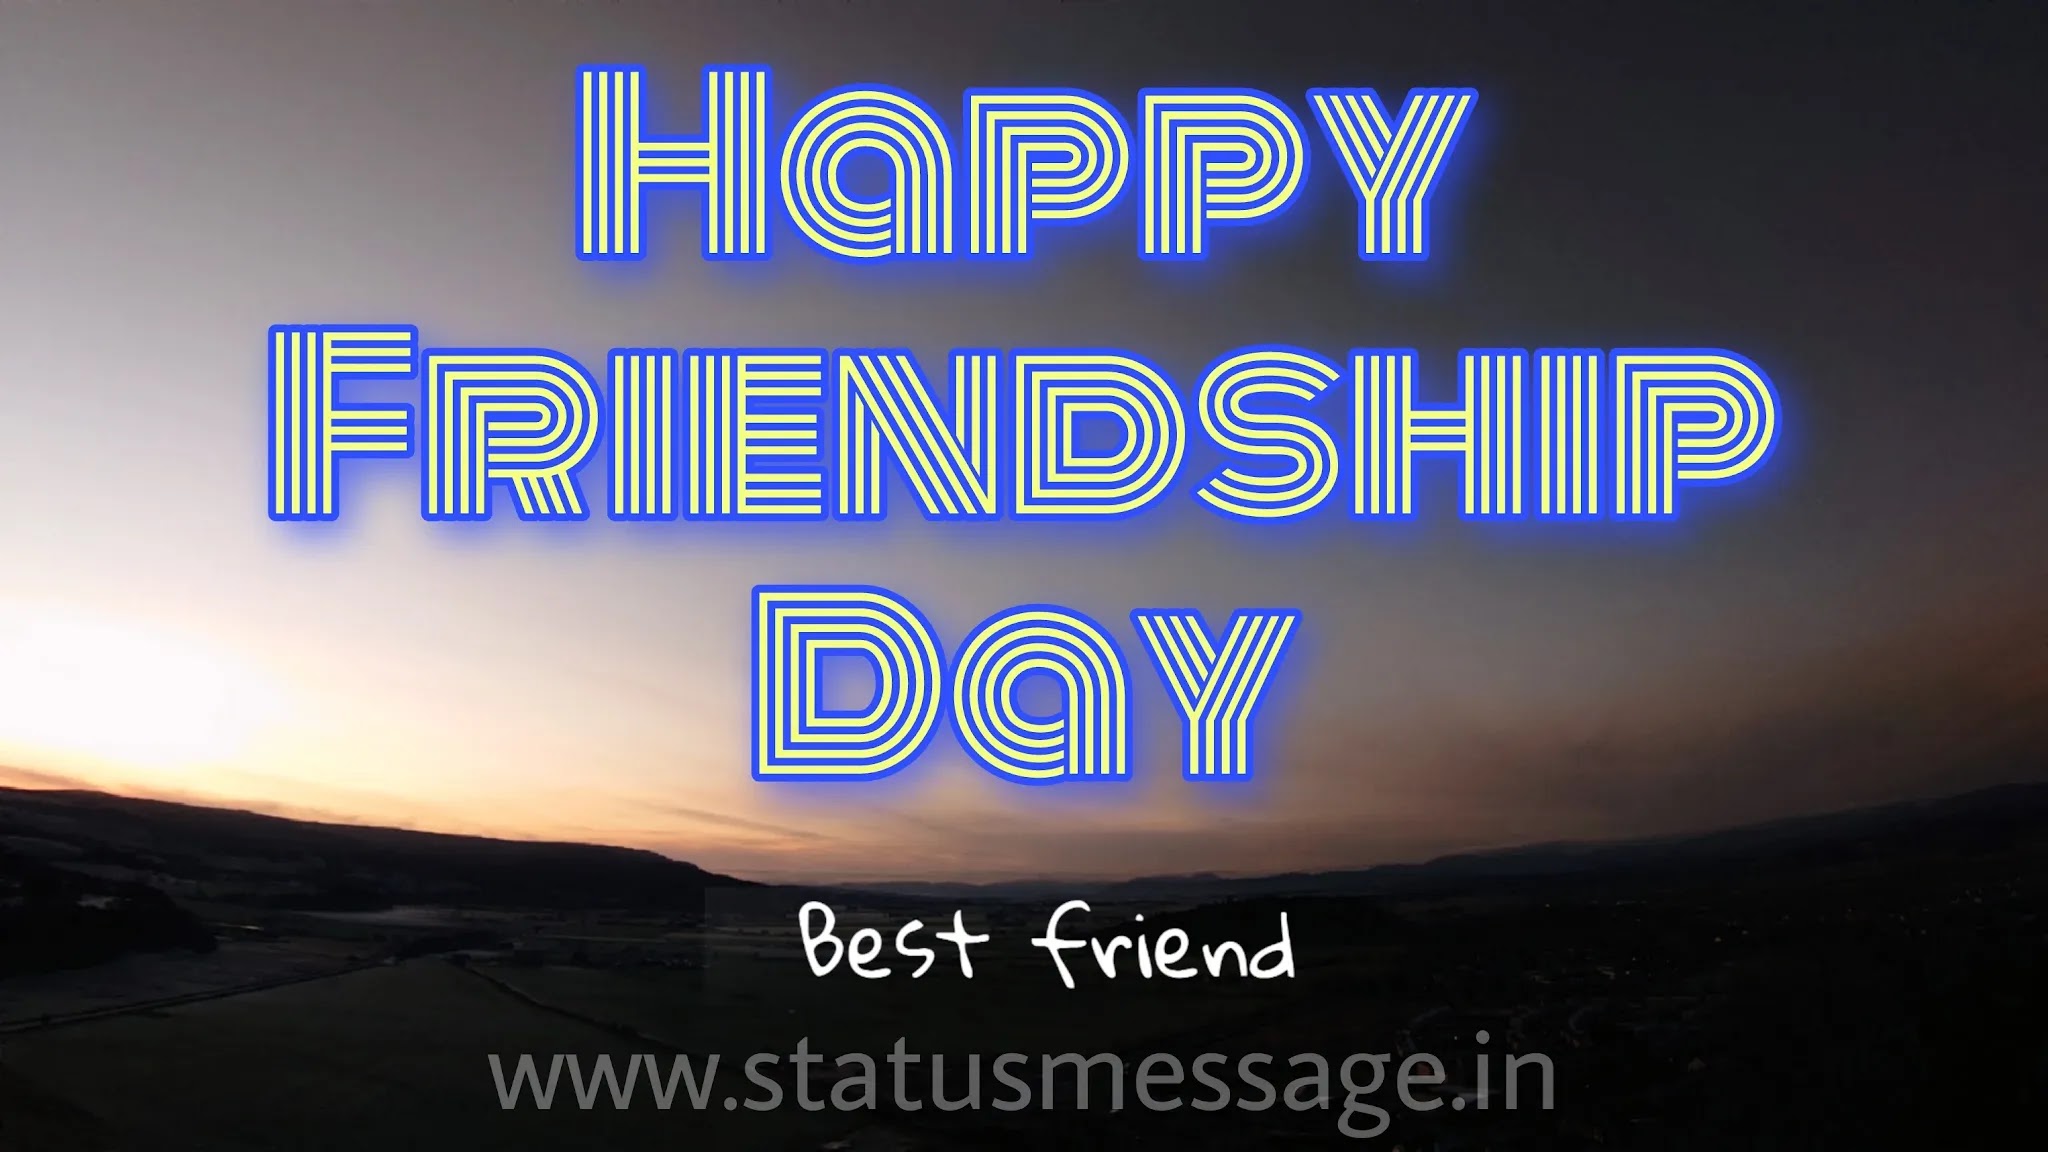 Happy Friendship Day 2022 Wishes Image, Quotes, Greetings, Pics